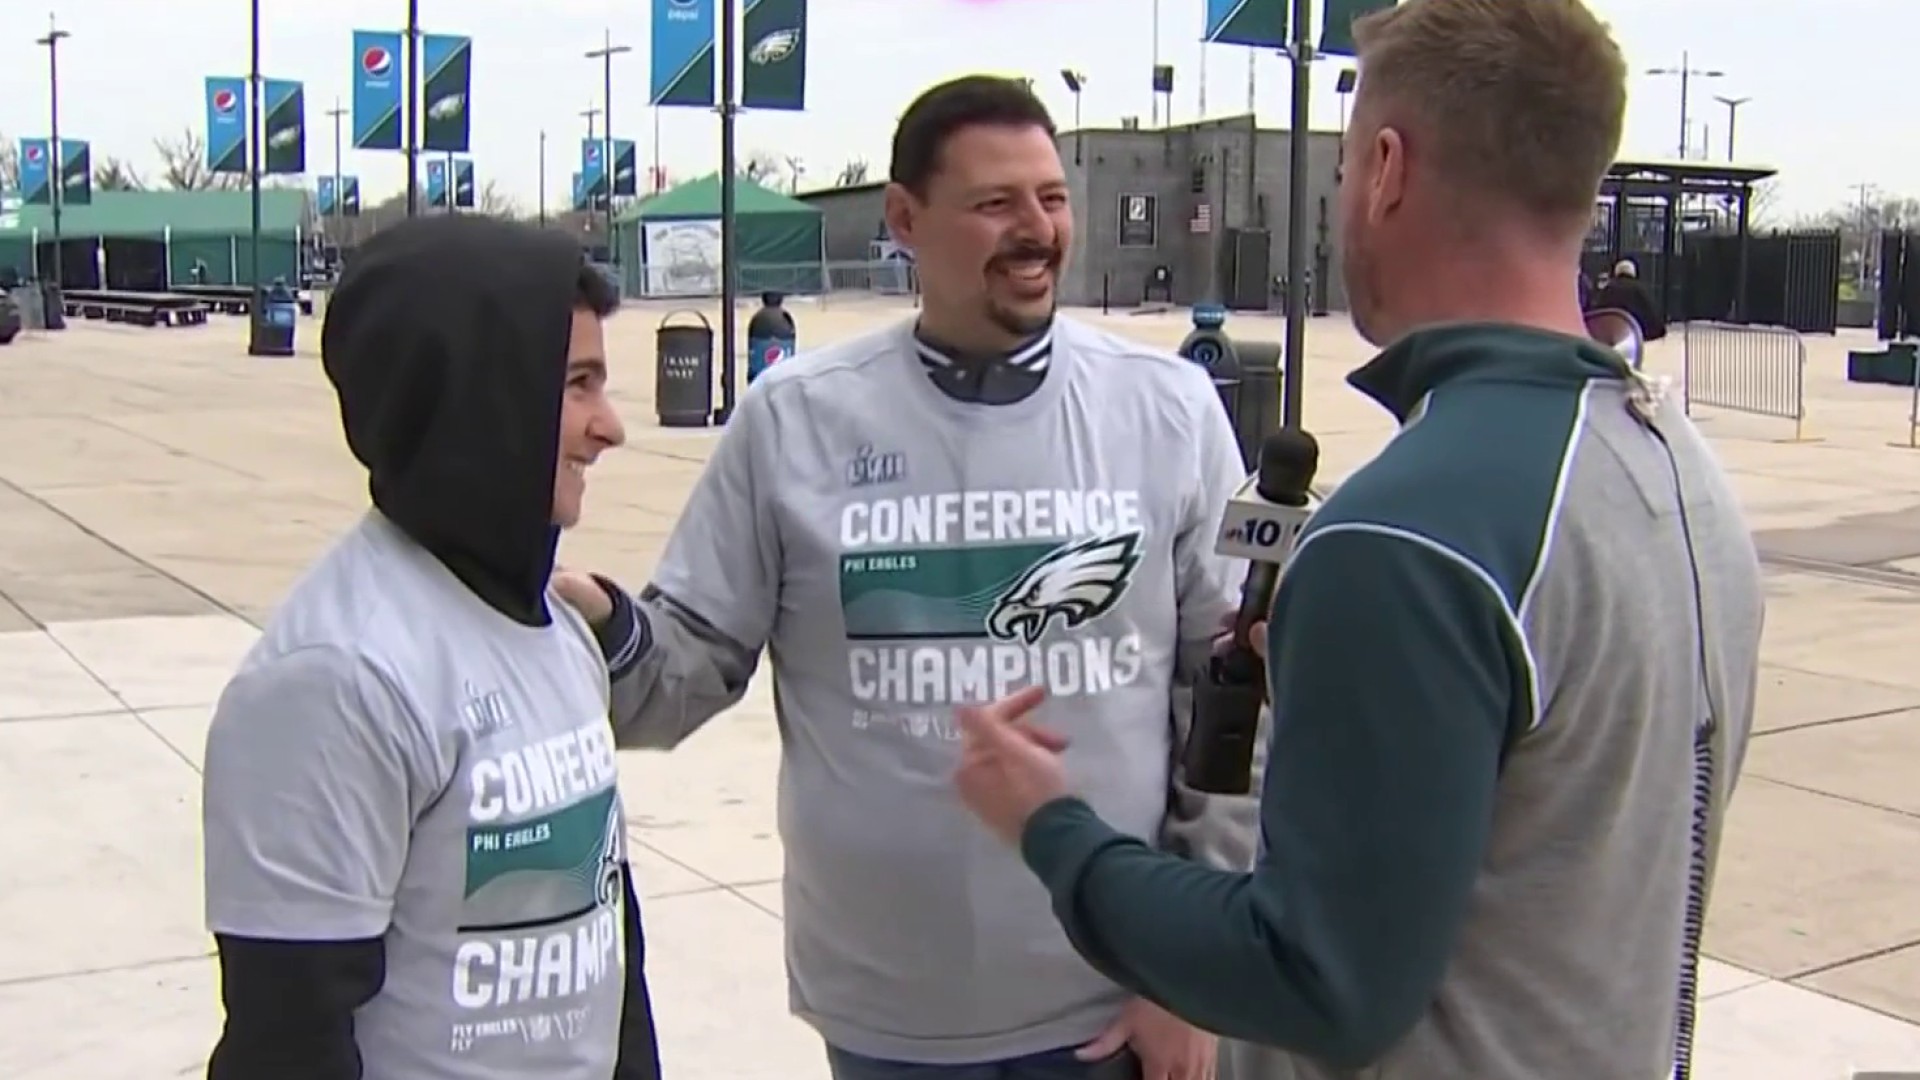 Eagles fans gear up for the The Super Bowl